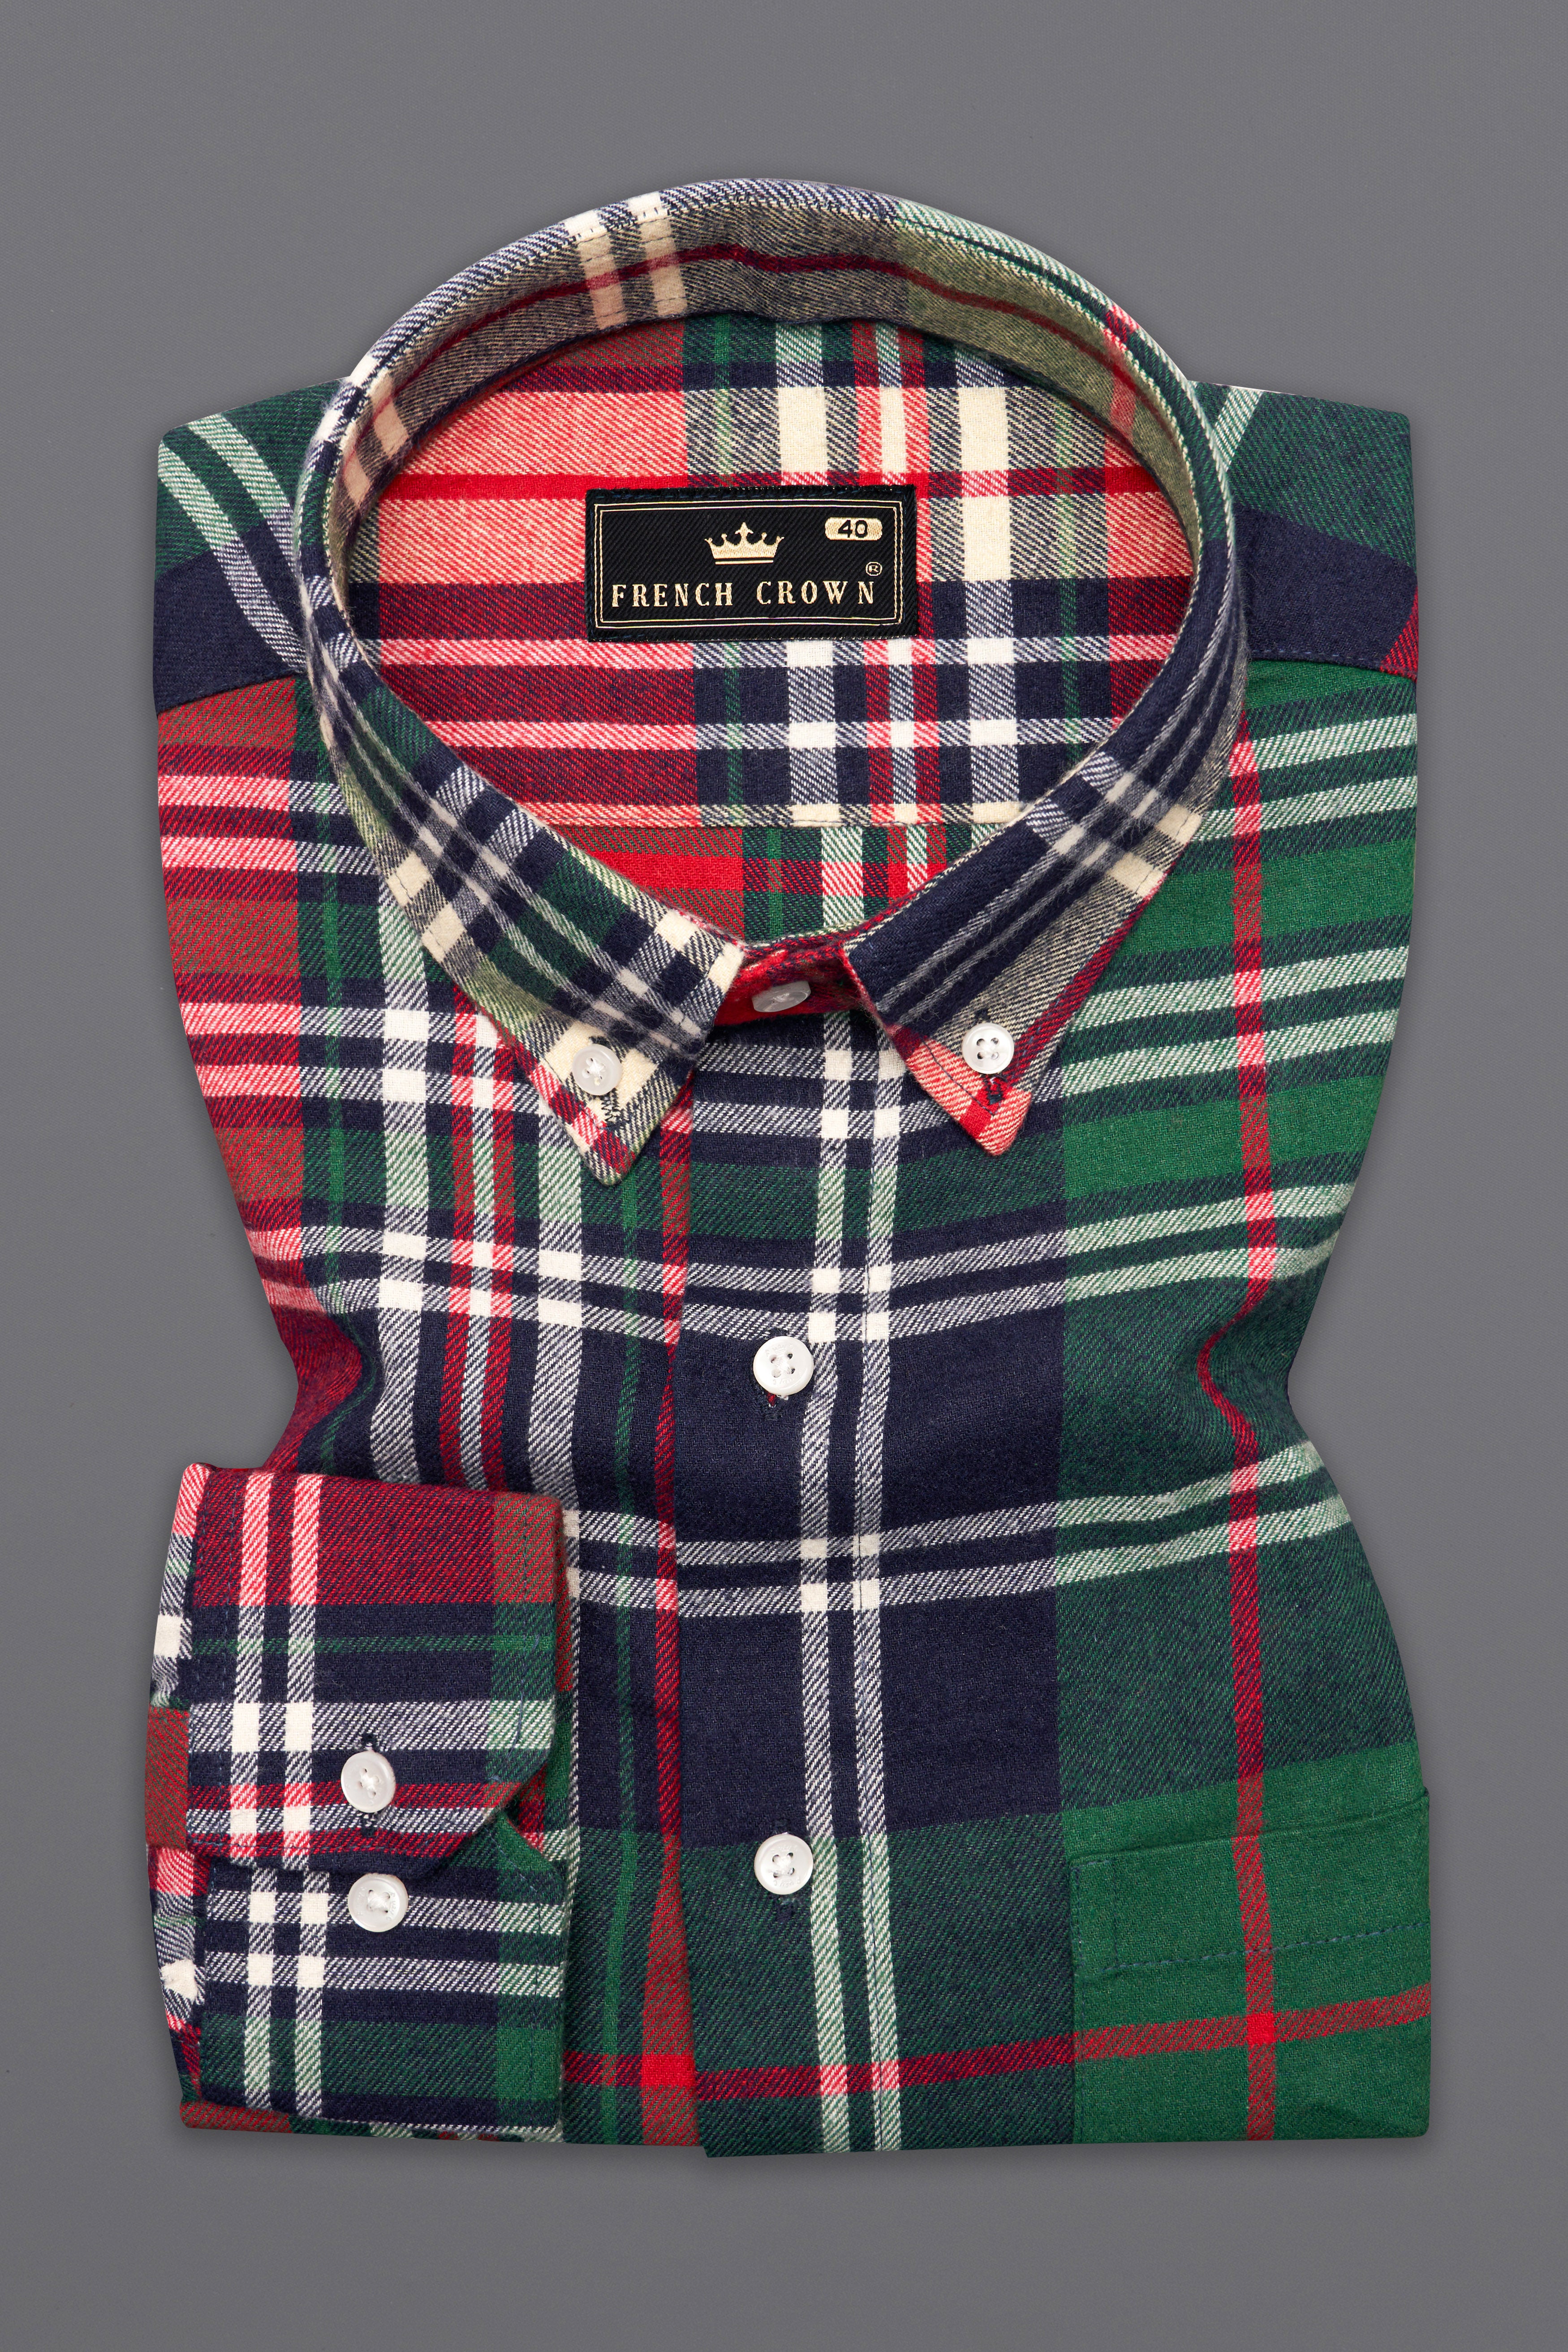 Carmine Red with Forest Green Plaid Button-Down Flannel Shirt 10149-BD-38, 10149-BD-H-38, 10149-BD-39, 10149-BD-H-39, 10149-BD-40, 10149-BD-H-40, 10149-BD-42, 10149-BD-H-42, 10149-BD-44, 10149-BD-H-44, 10149-BD-46, 10149-BD-H-46, 10149-BD-48, 10149-BD-H-48, 10149-BD-50, 10149-BD-H-50, 10149-BD-52, 10149-BD-H-52